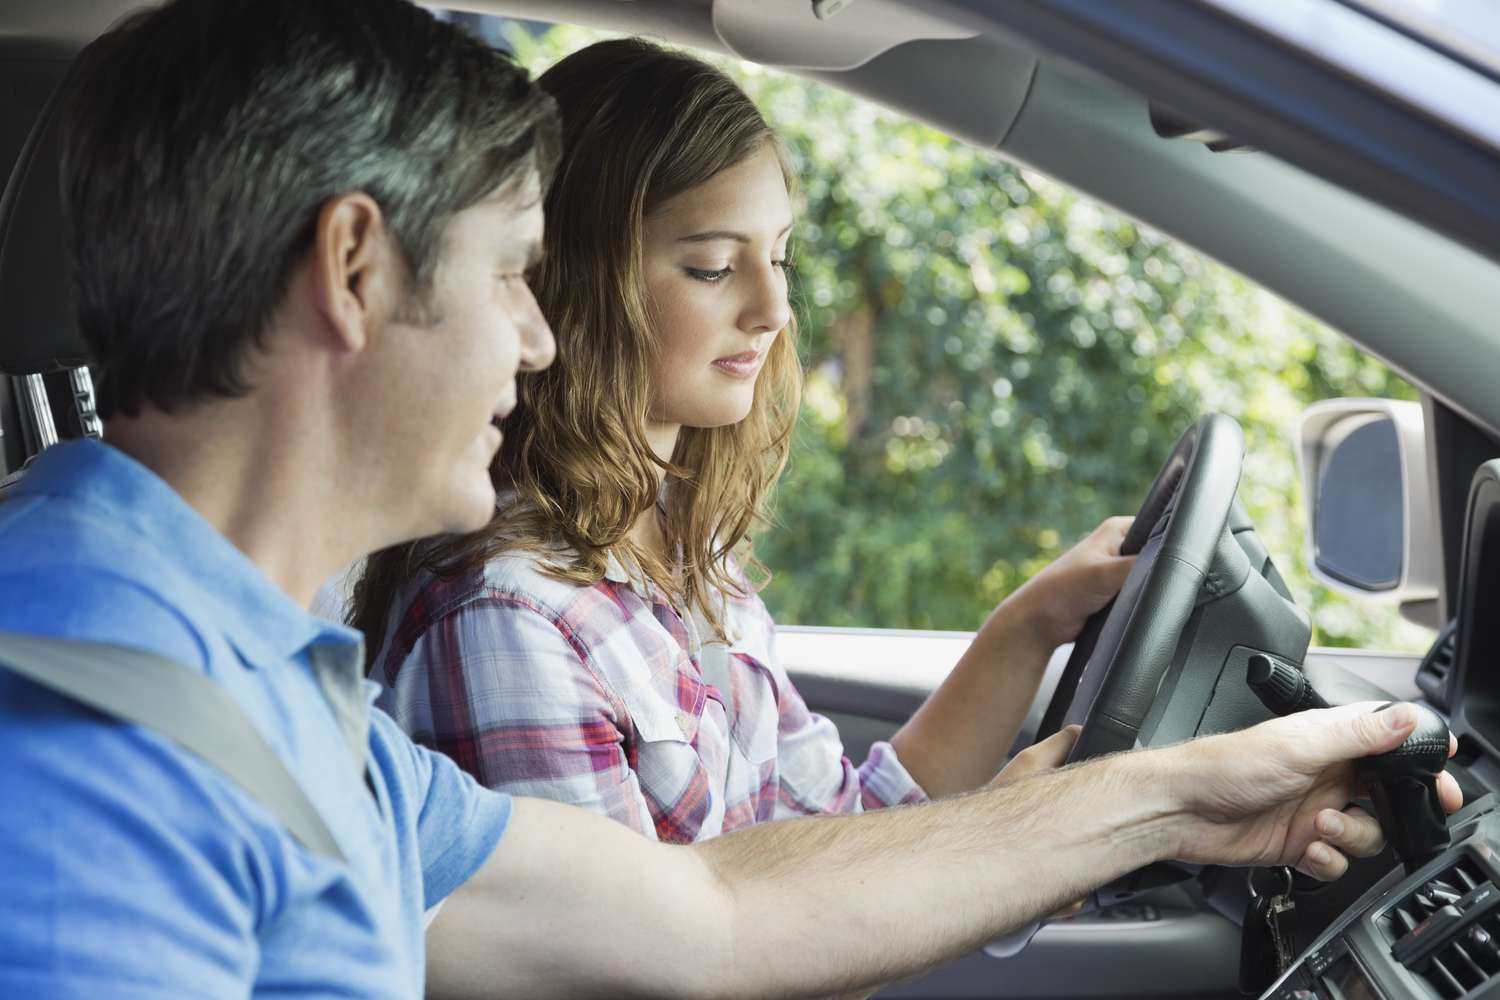 A parent teaching their teen to drive, using Get Drivers Ed's comprehensive materials, in a safe driving environment.